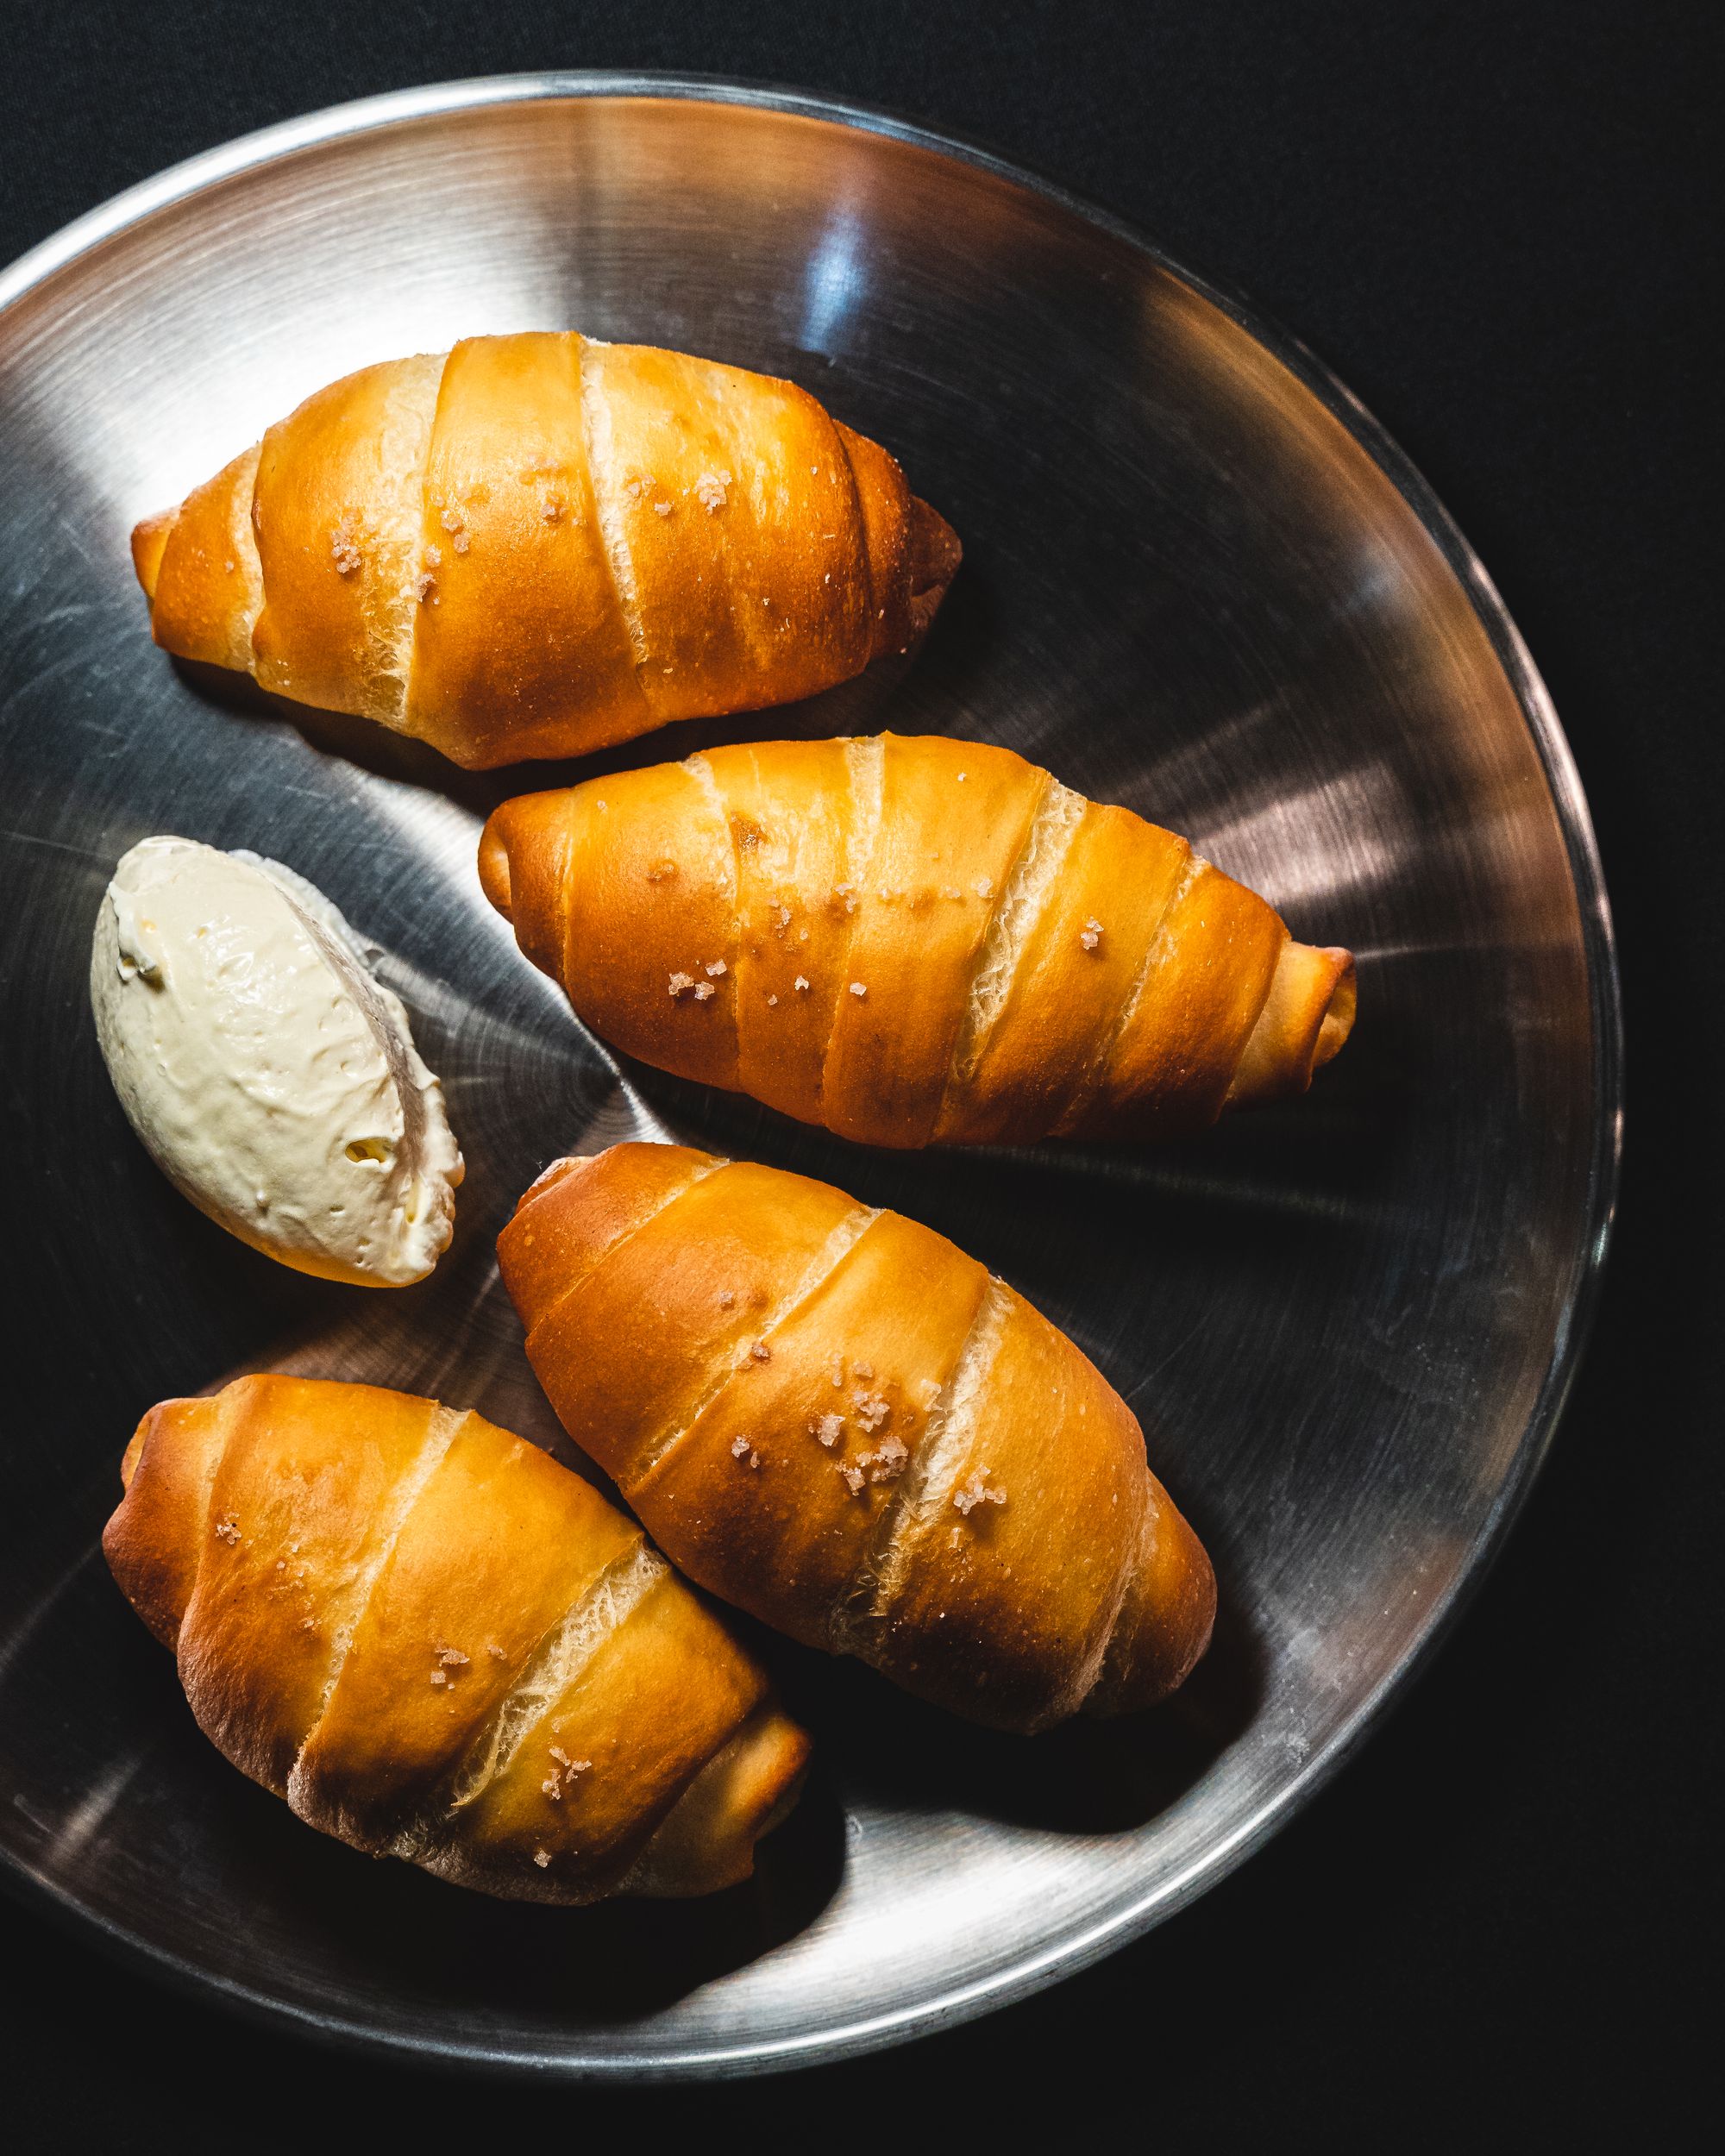 Top down shot of croissant shaped pastries on a metal plate with a quenelle of butter 